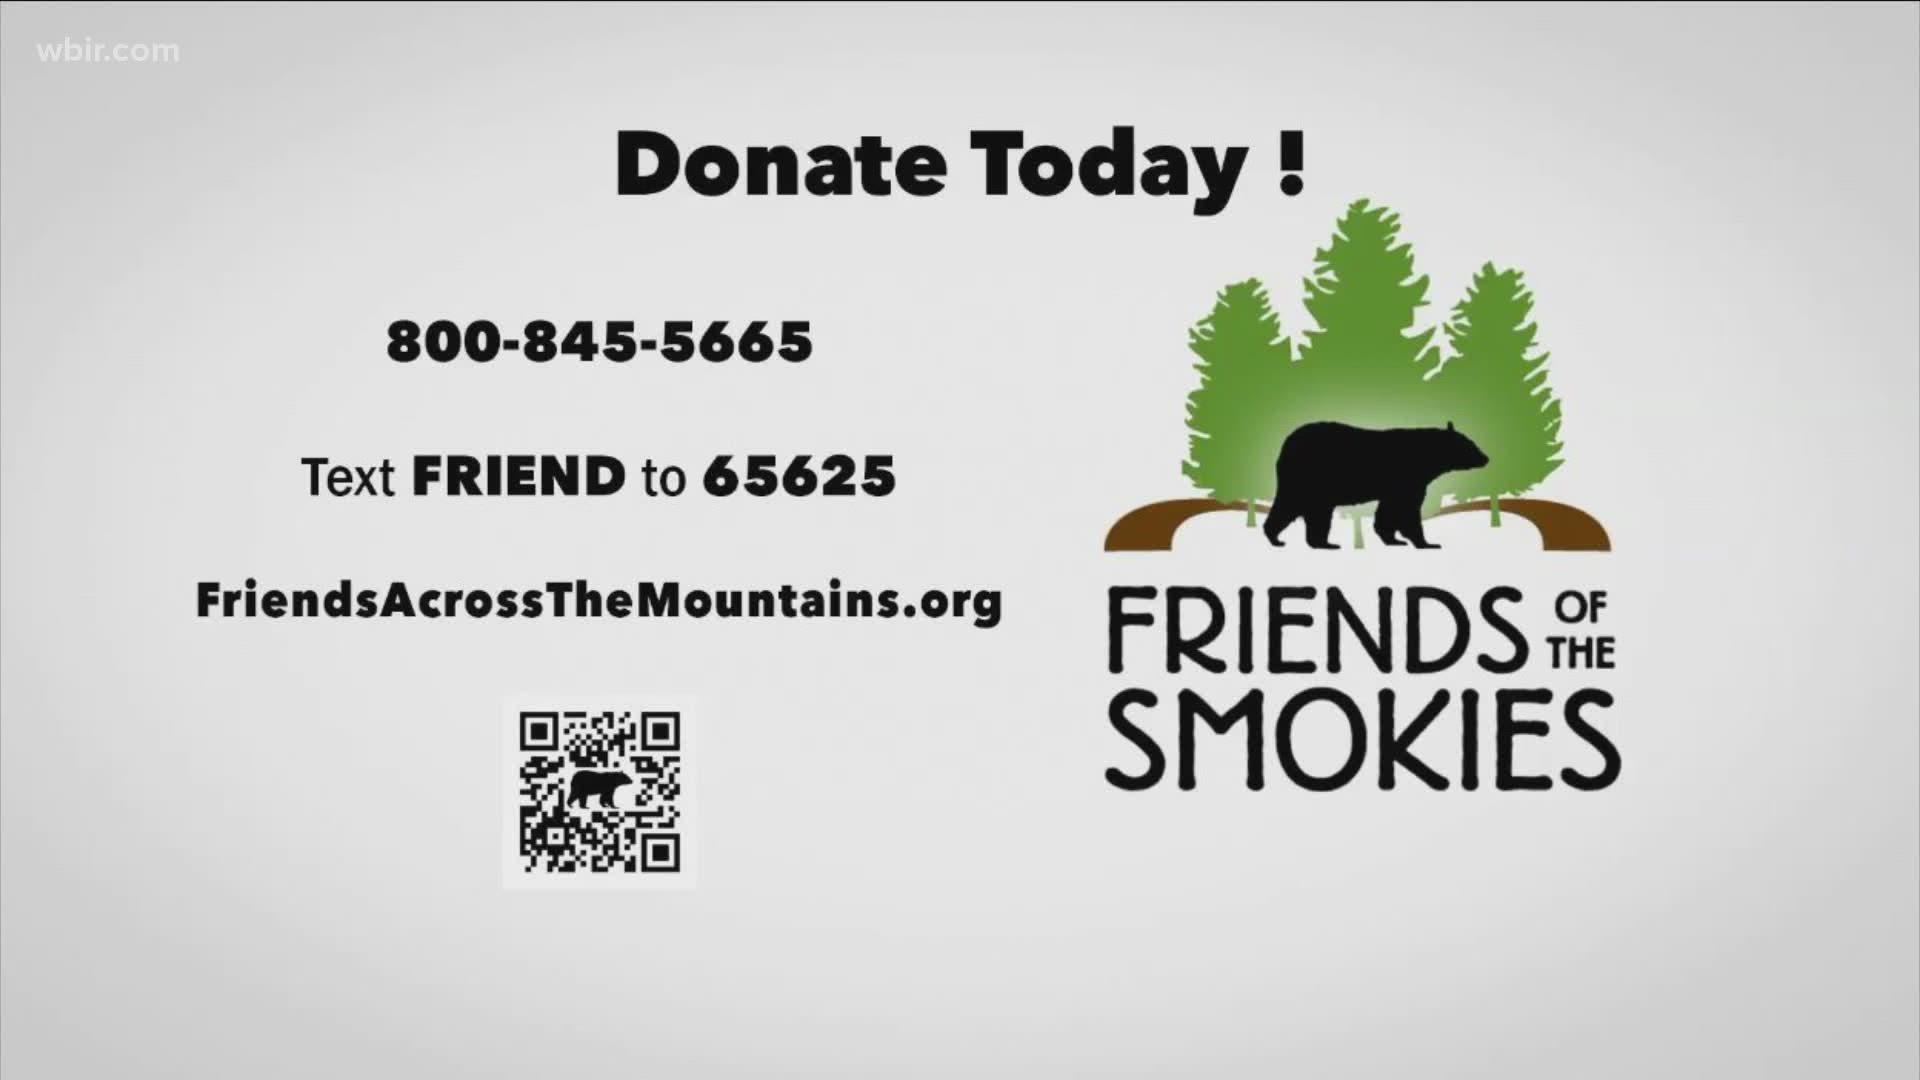 We're partnering with friends of the Smokies to show you some of their projects in the mountains. You can head to the Friends of the Smokies website to donate.